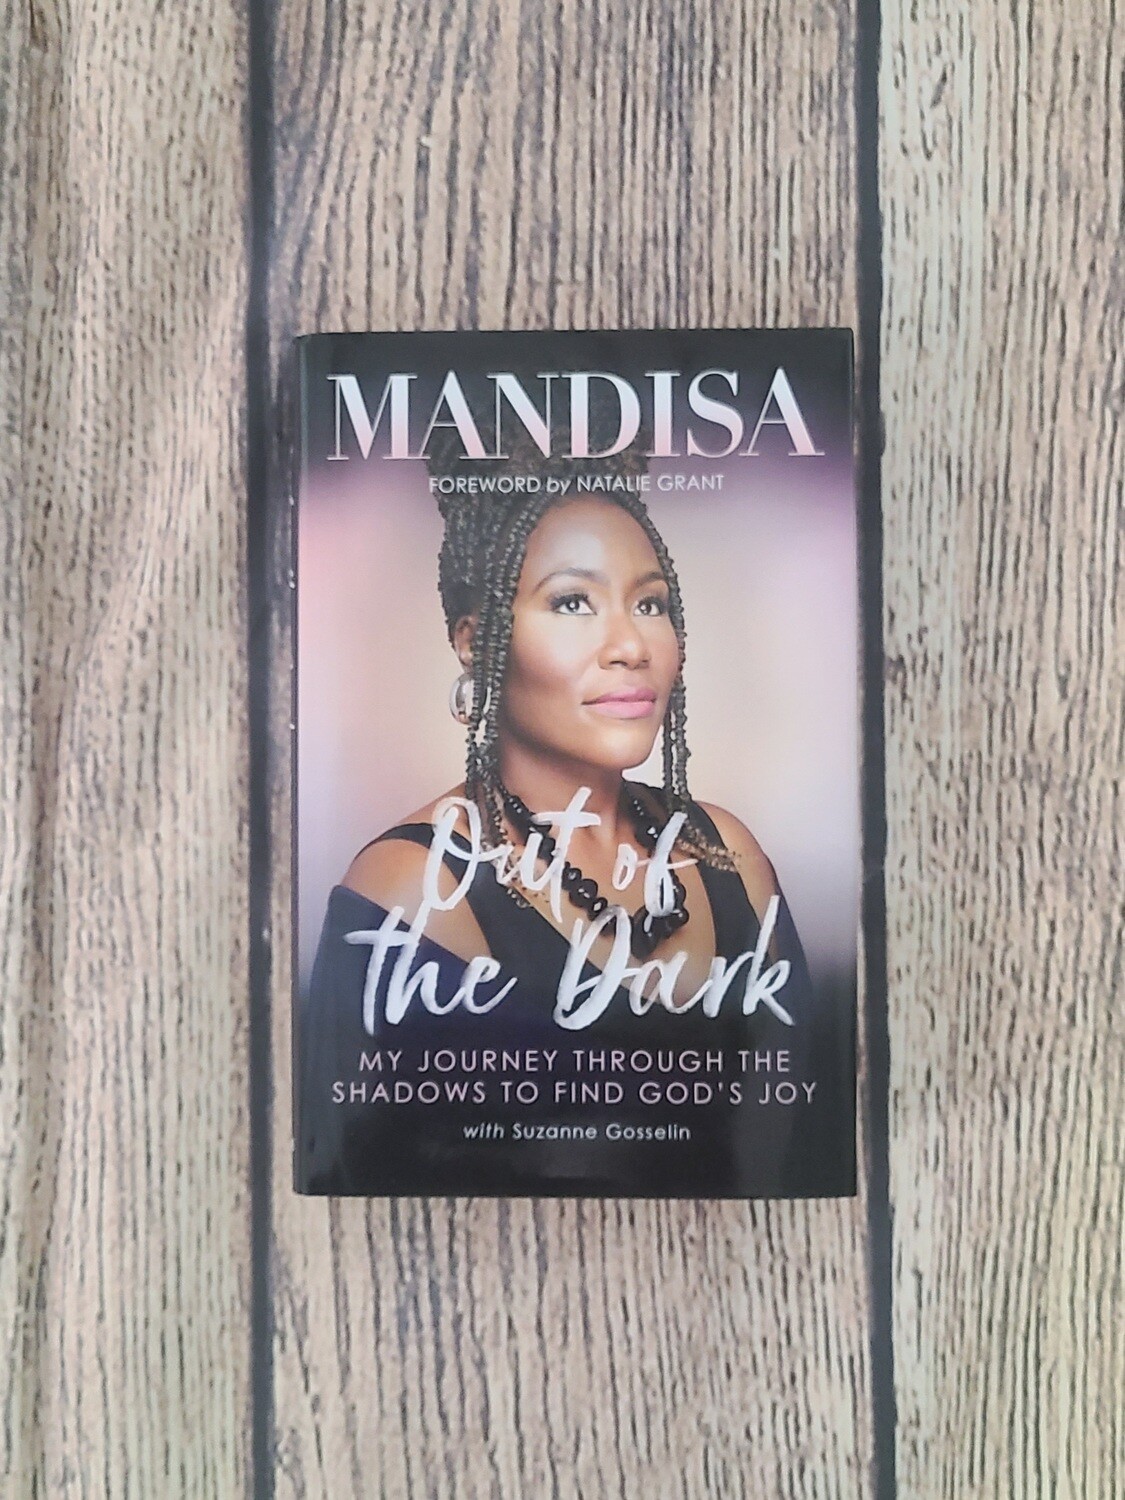 Out of the Dark: My Journey Through the Shadows to Find God's Joy by Mandisa with Suzanne Gosselin and Foreword by Natalie Grant